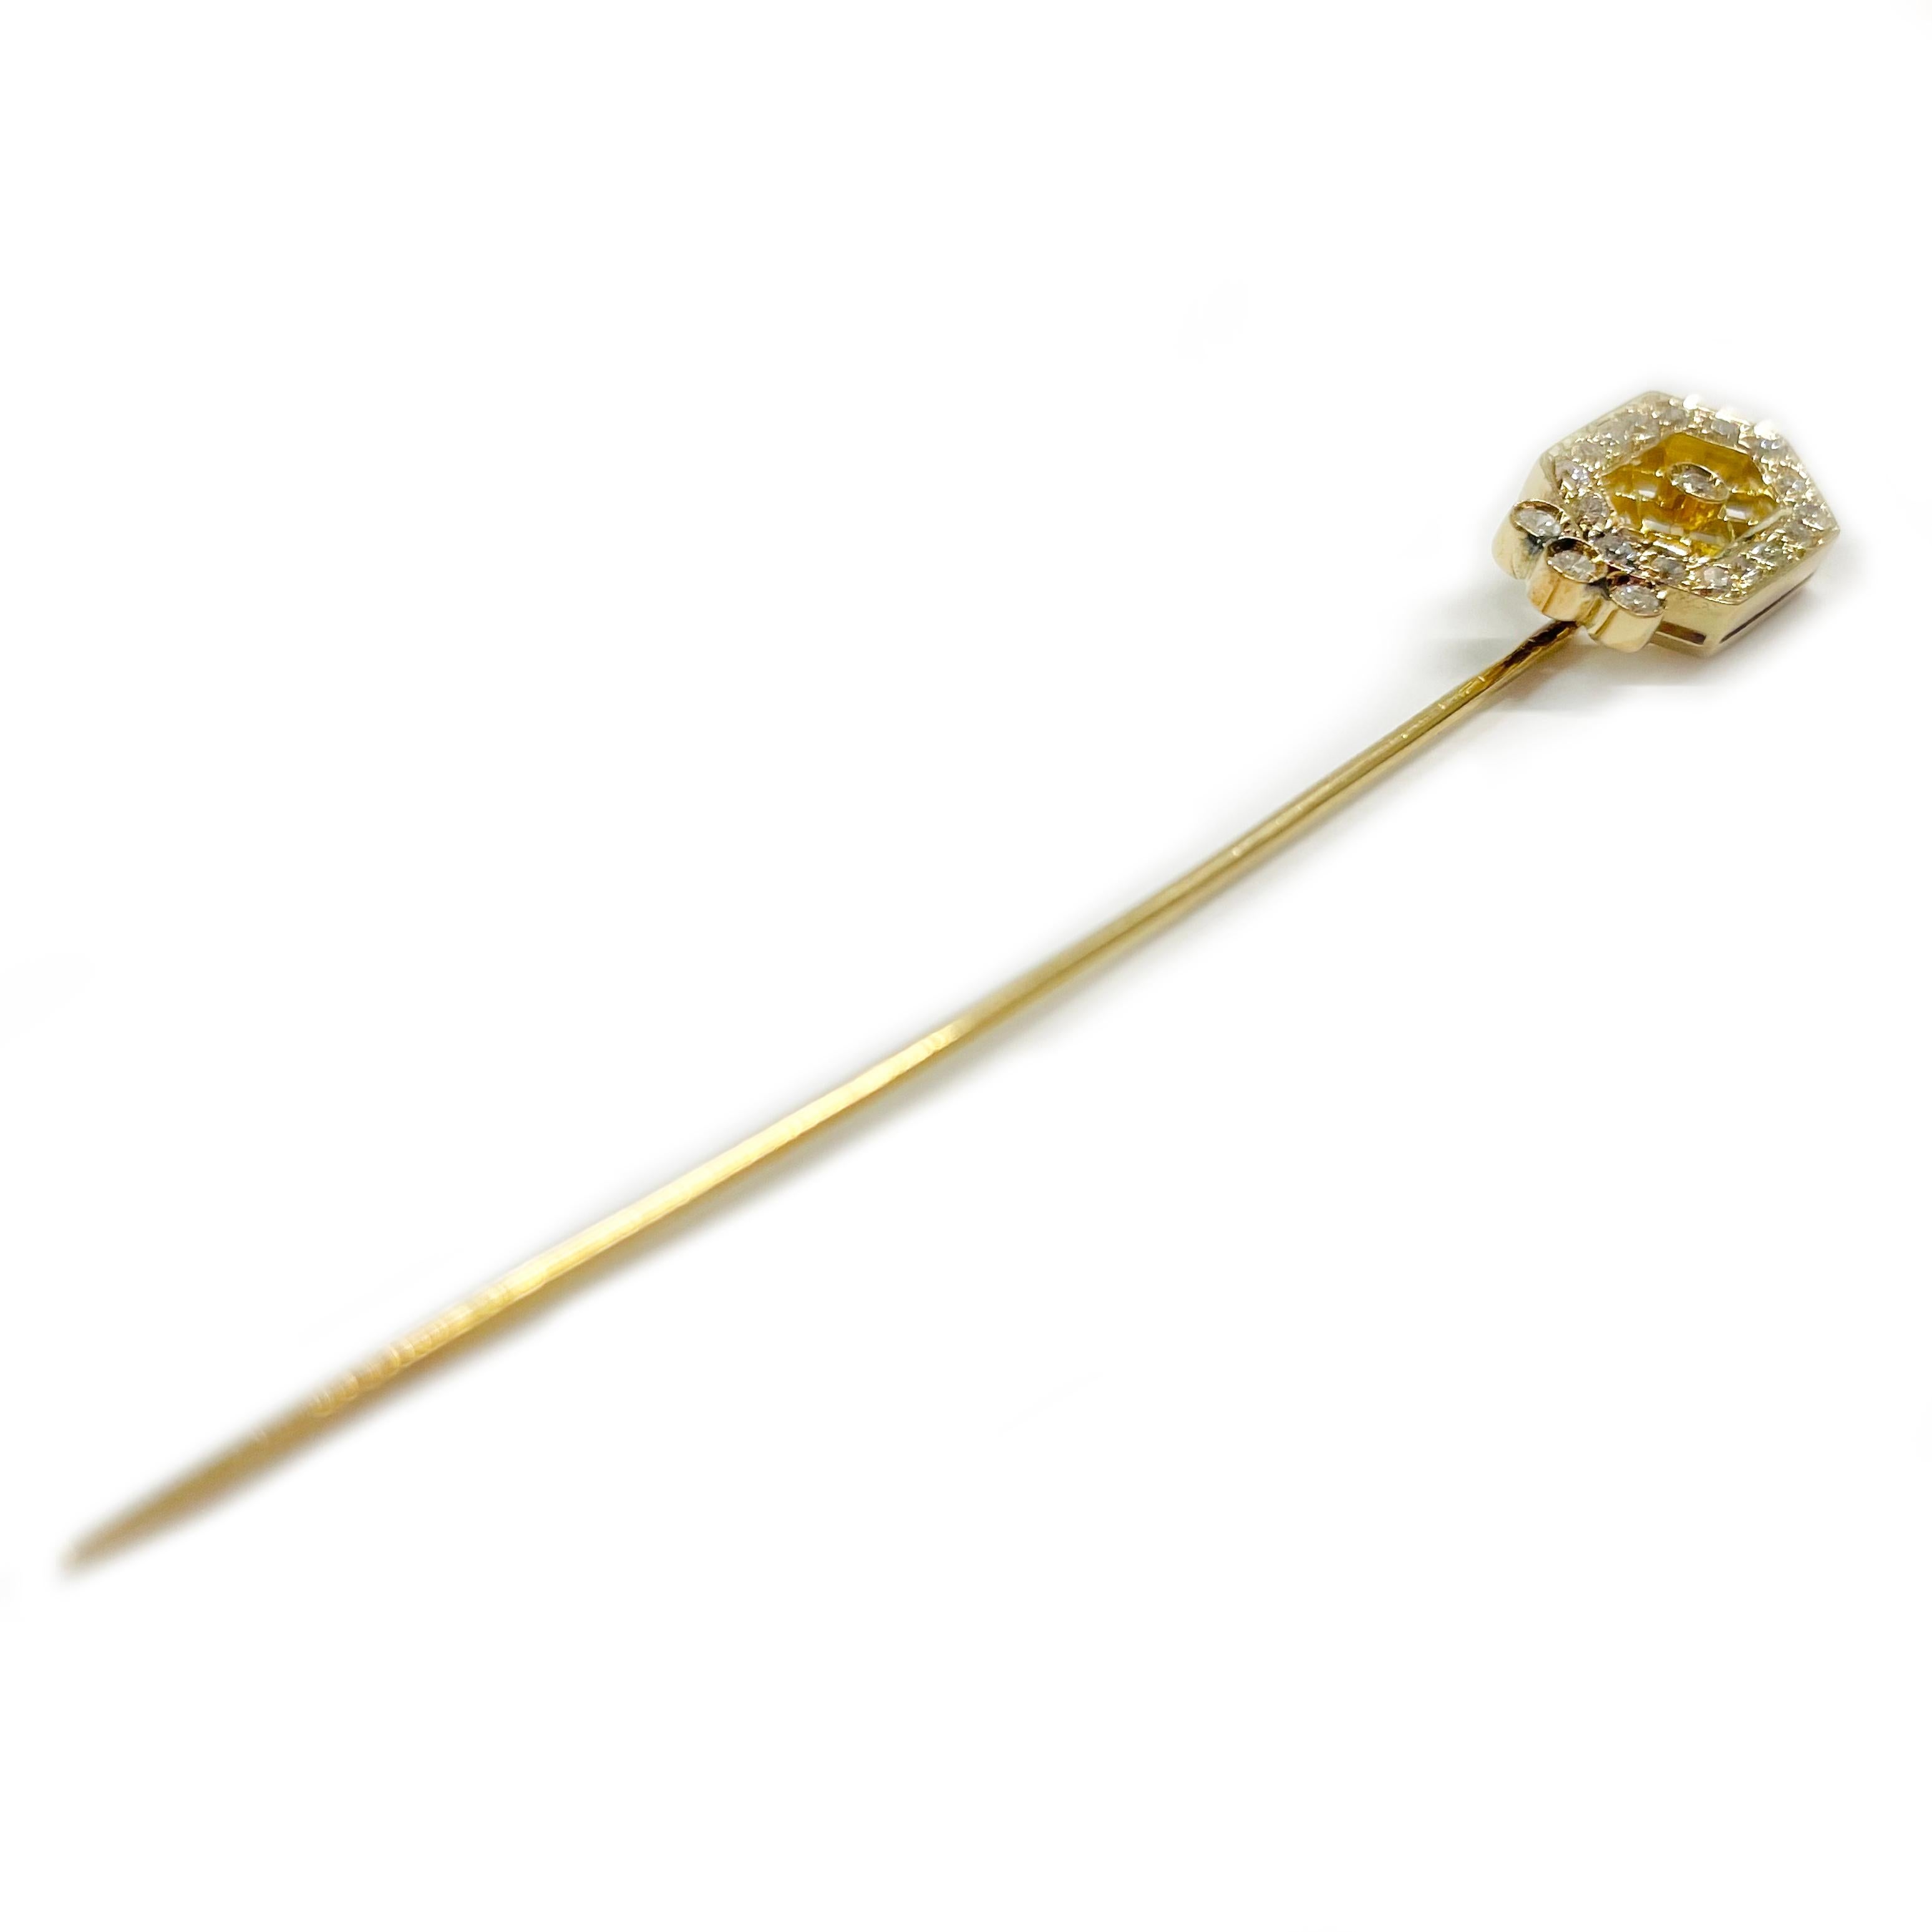 18 Karat Yellow Gold Diamond Stick Pin. This lovely pin features twenty round bead and bezel-set diamonds. There are sixteen 1.56mm diamonds and four 1.8mm diamonds for a total carat weight of 0.34ctw. The diamonds are set on an elongated hexagon